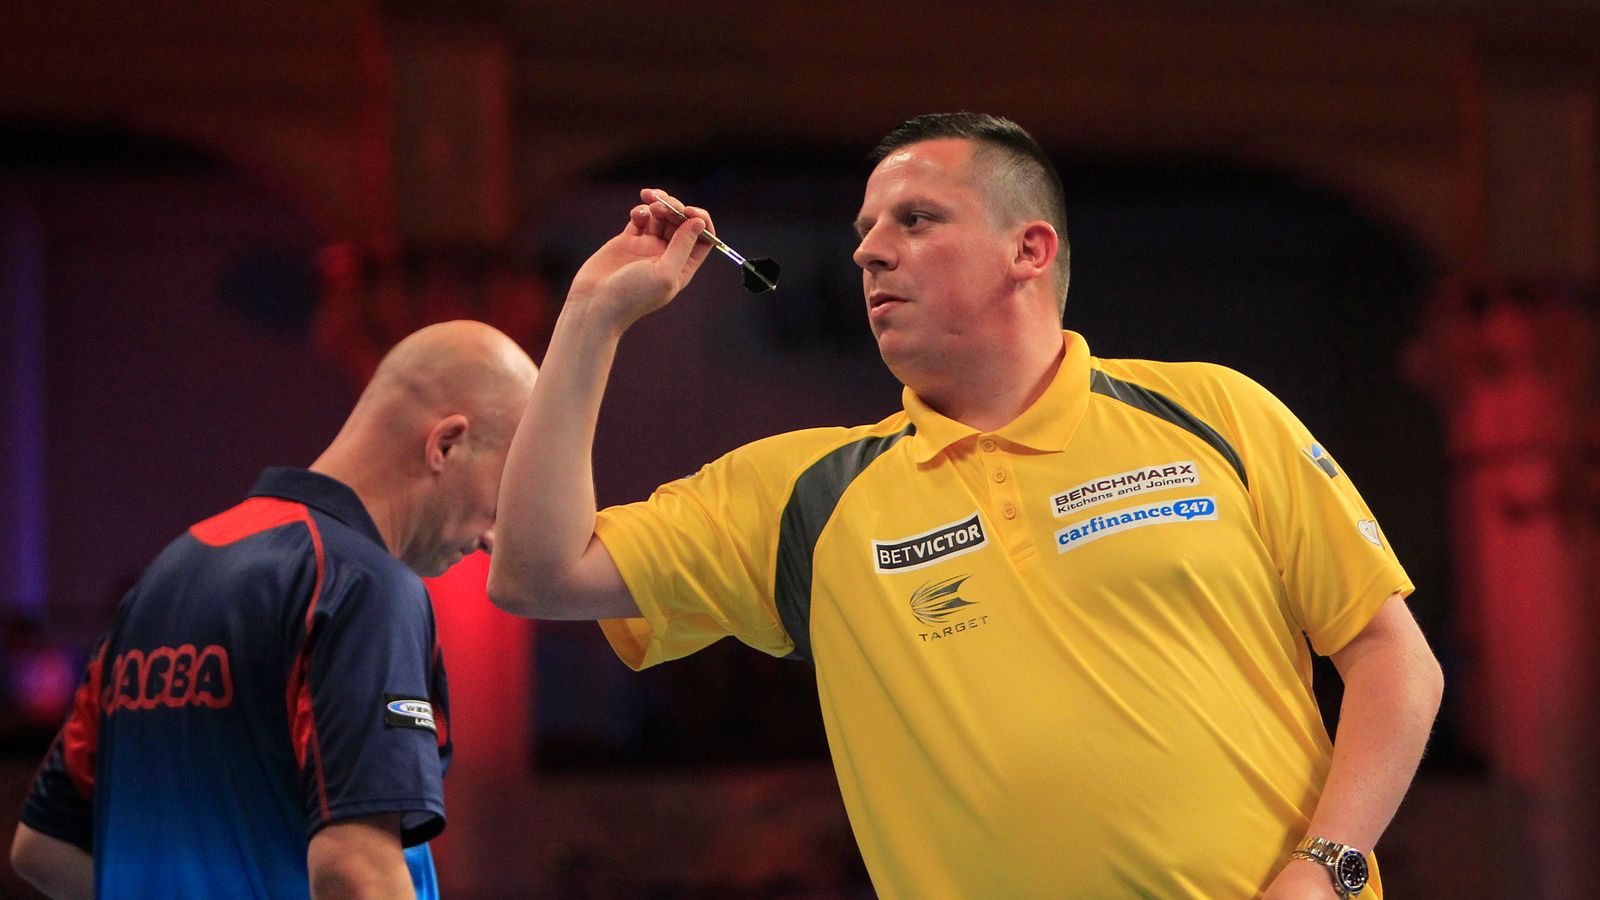 WATCH: Dave Chisnall hits nine-darter against Peter Wright | Darts News ...